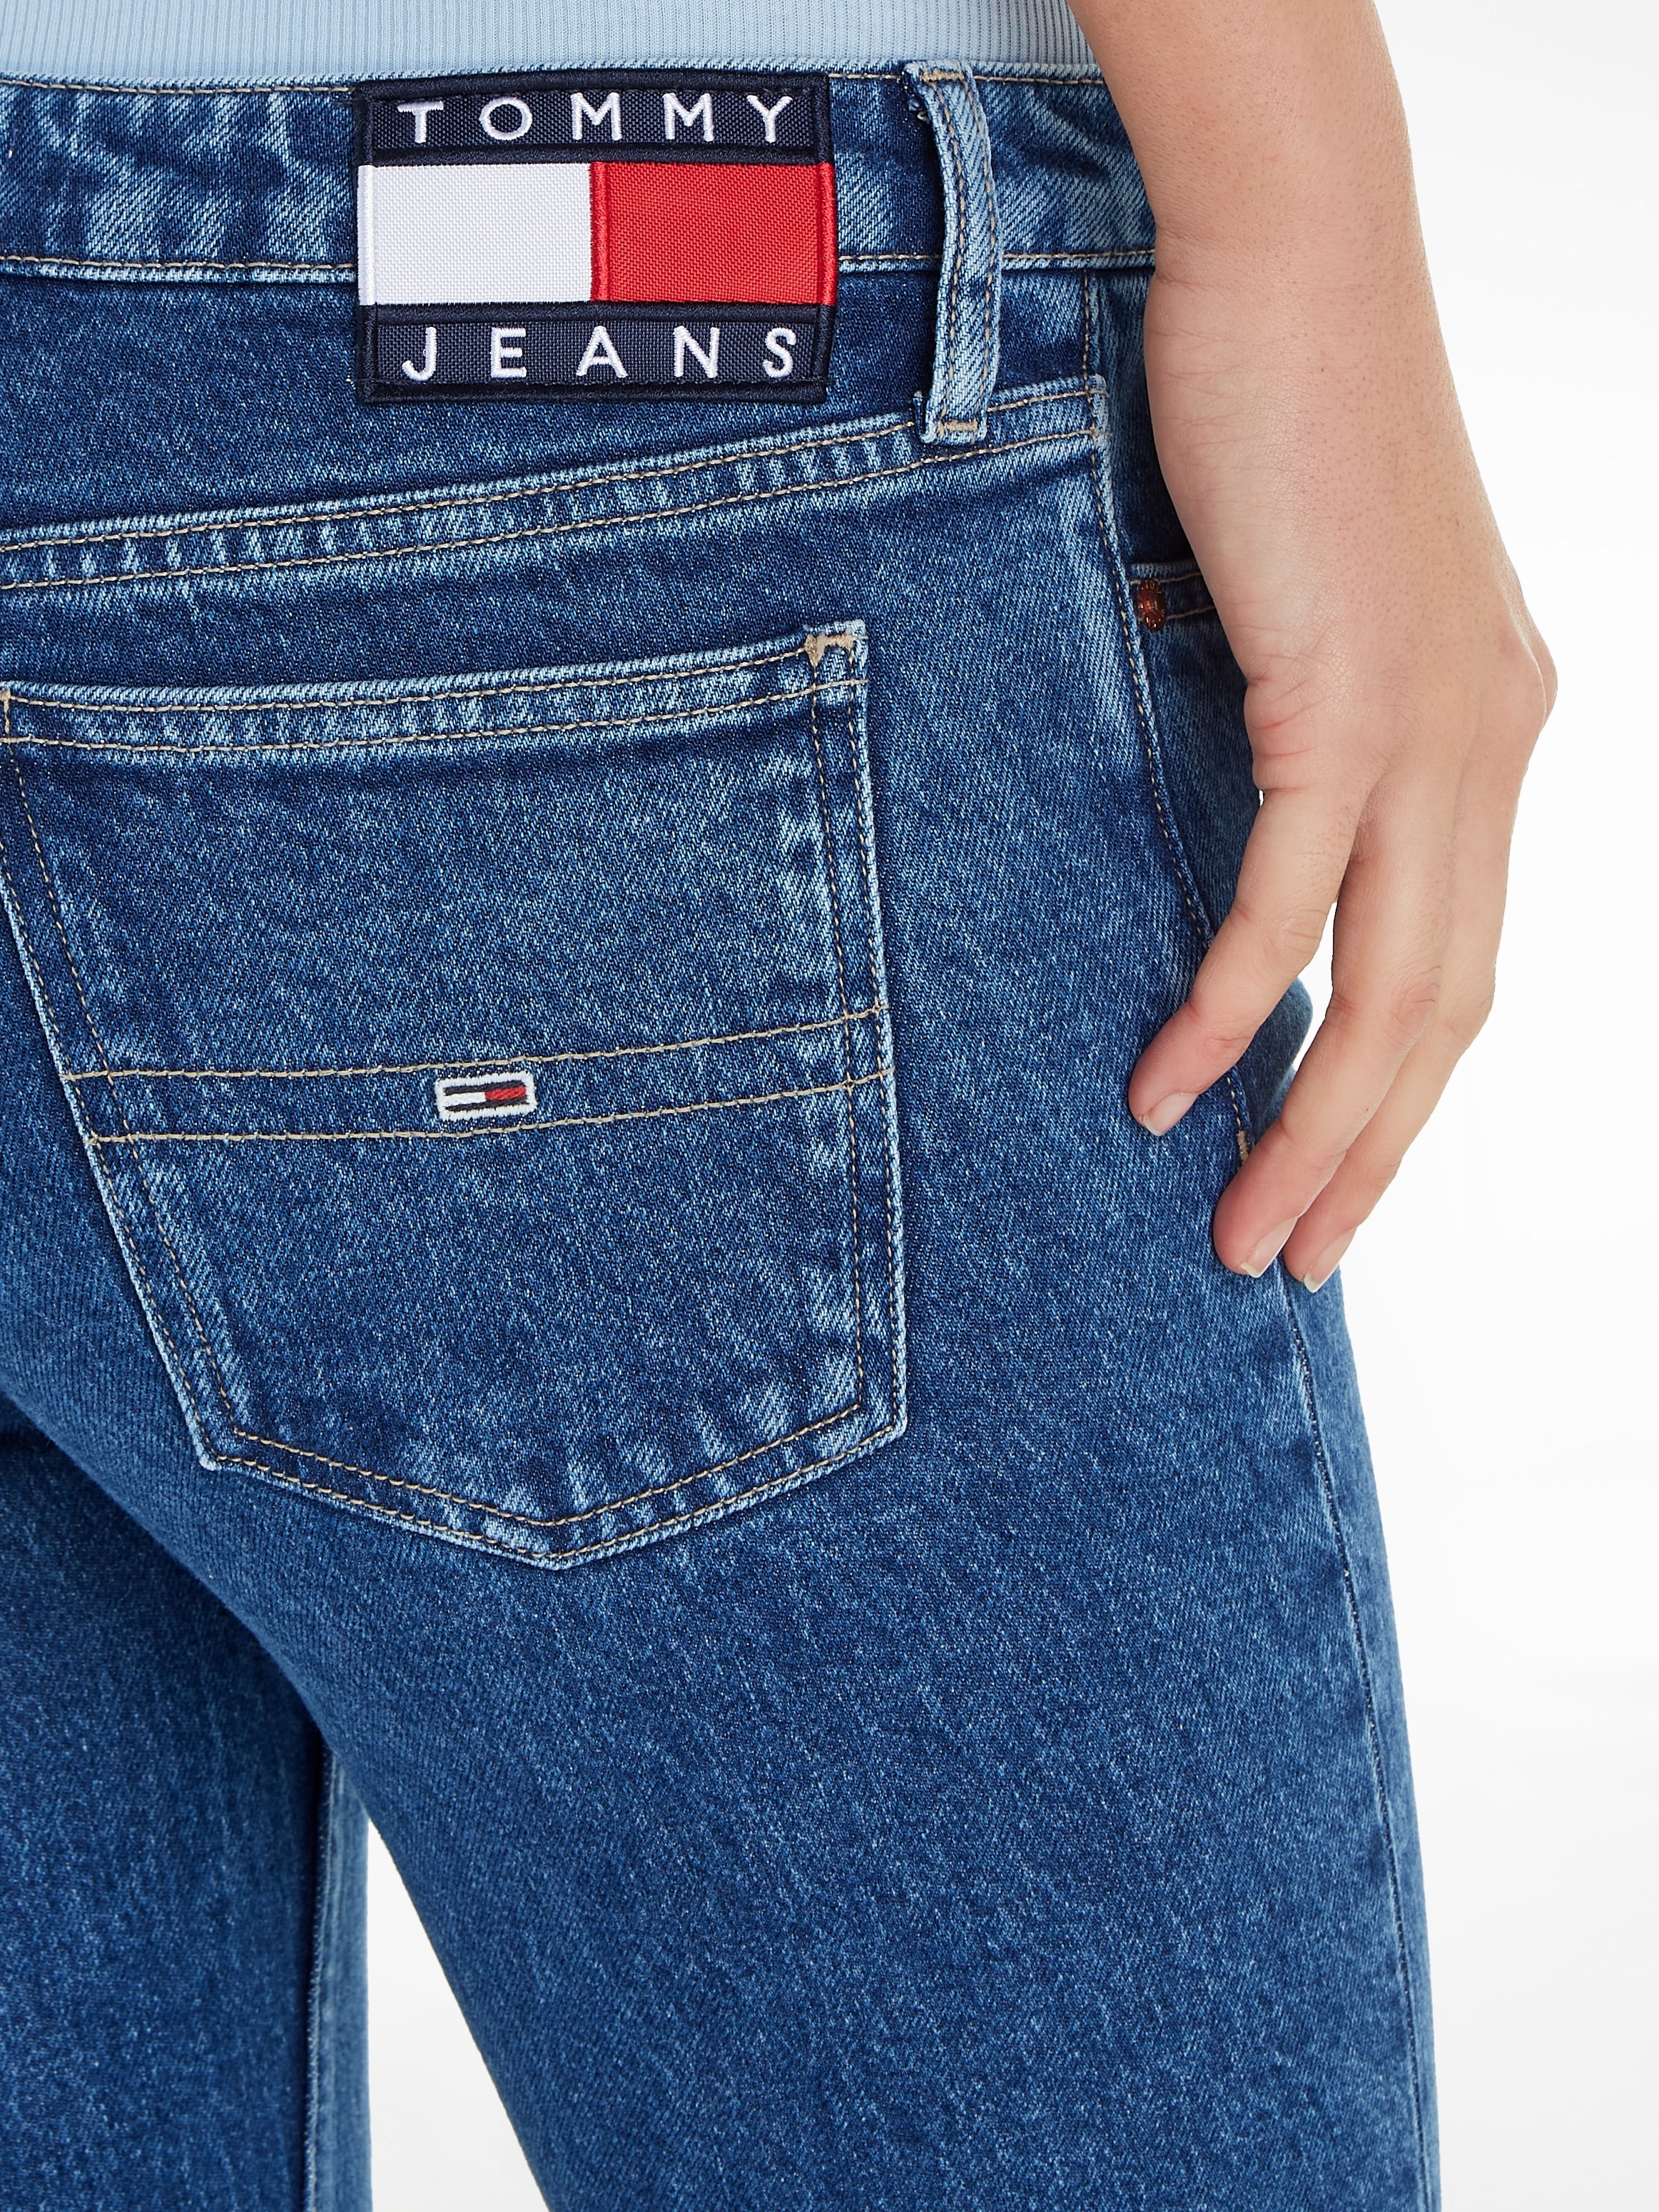 Tommy Jeans Schlagjeans, mit Jeans ♕ bei Logobadge Tommy